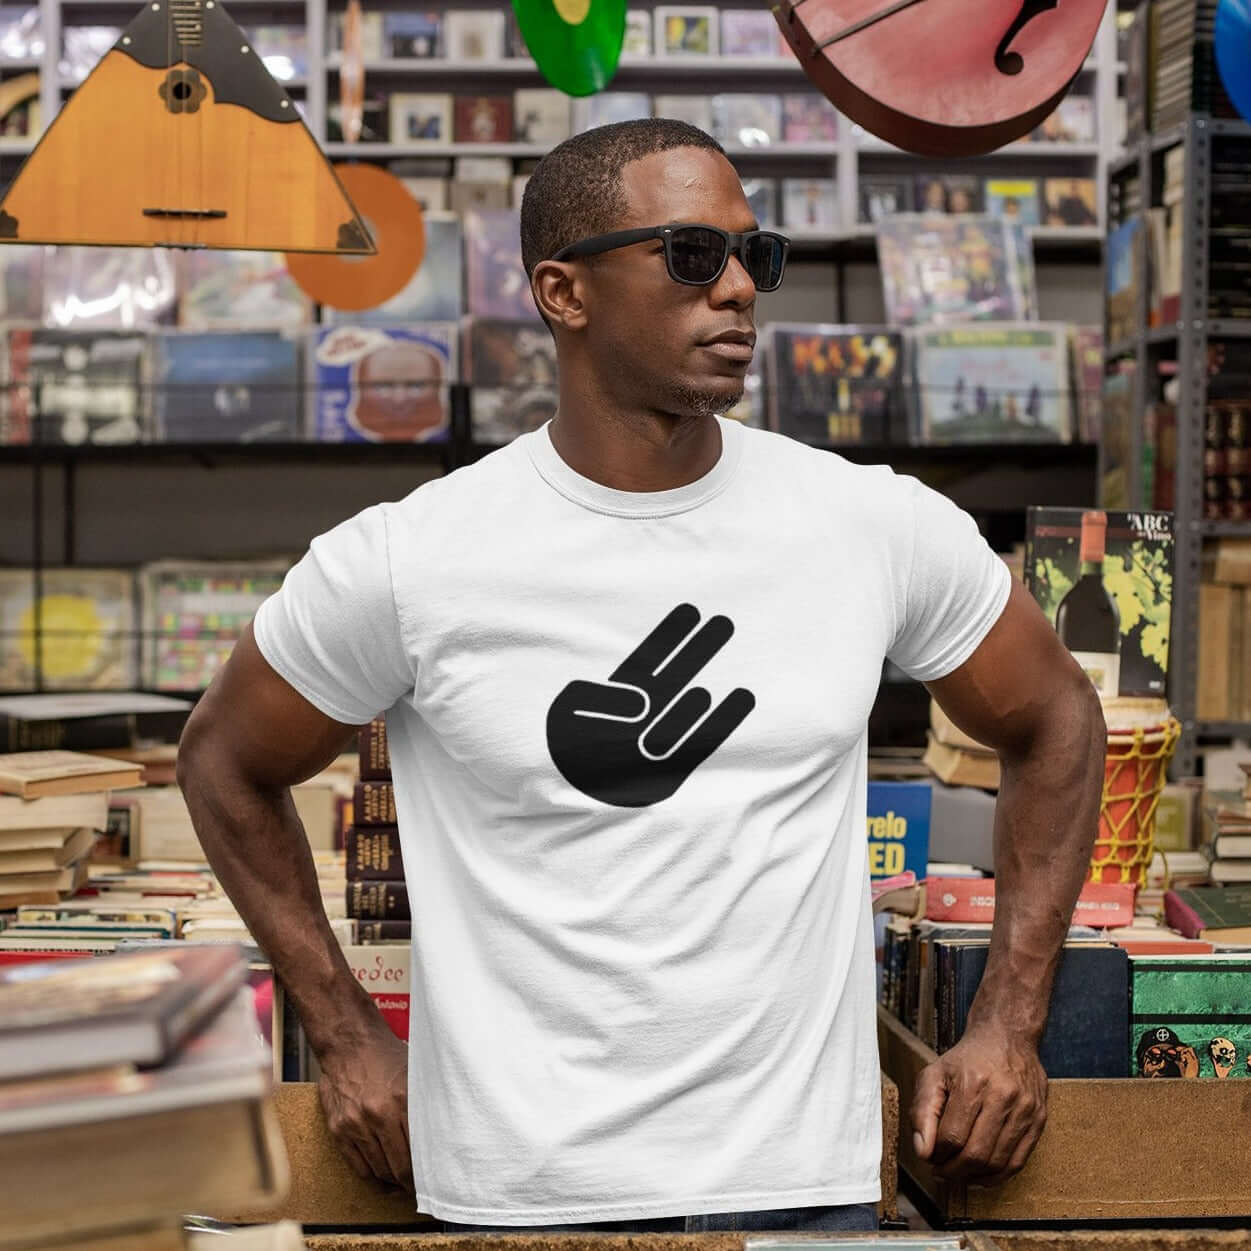 Man wearing a white t-shirt with the universal symbol for The Shocker printed on the front.